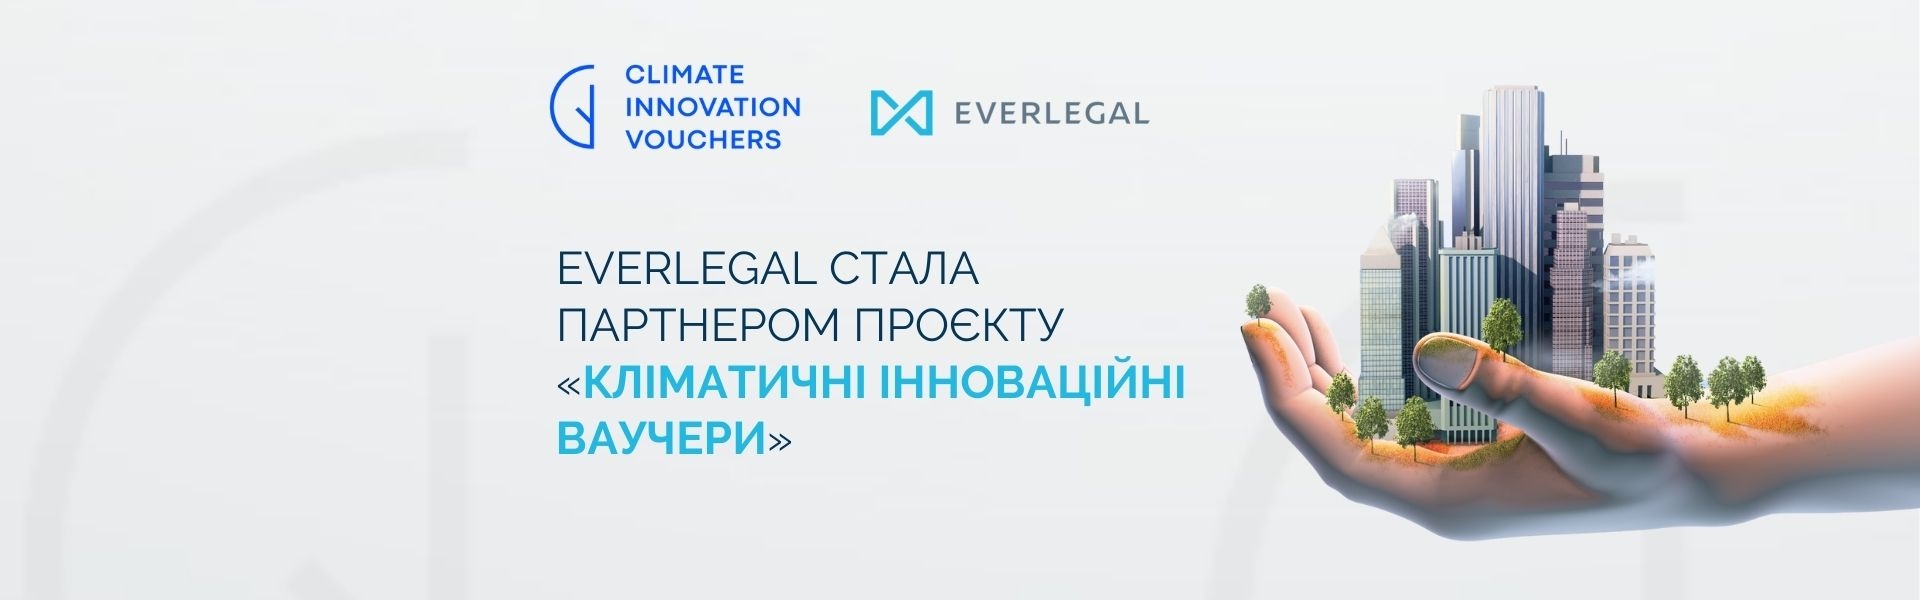 EVERLEGAL joined Climate Innovation Vouchers project